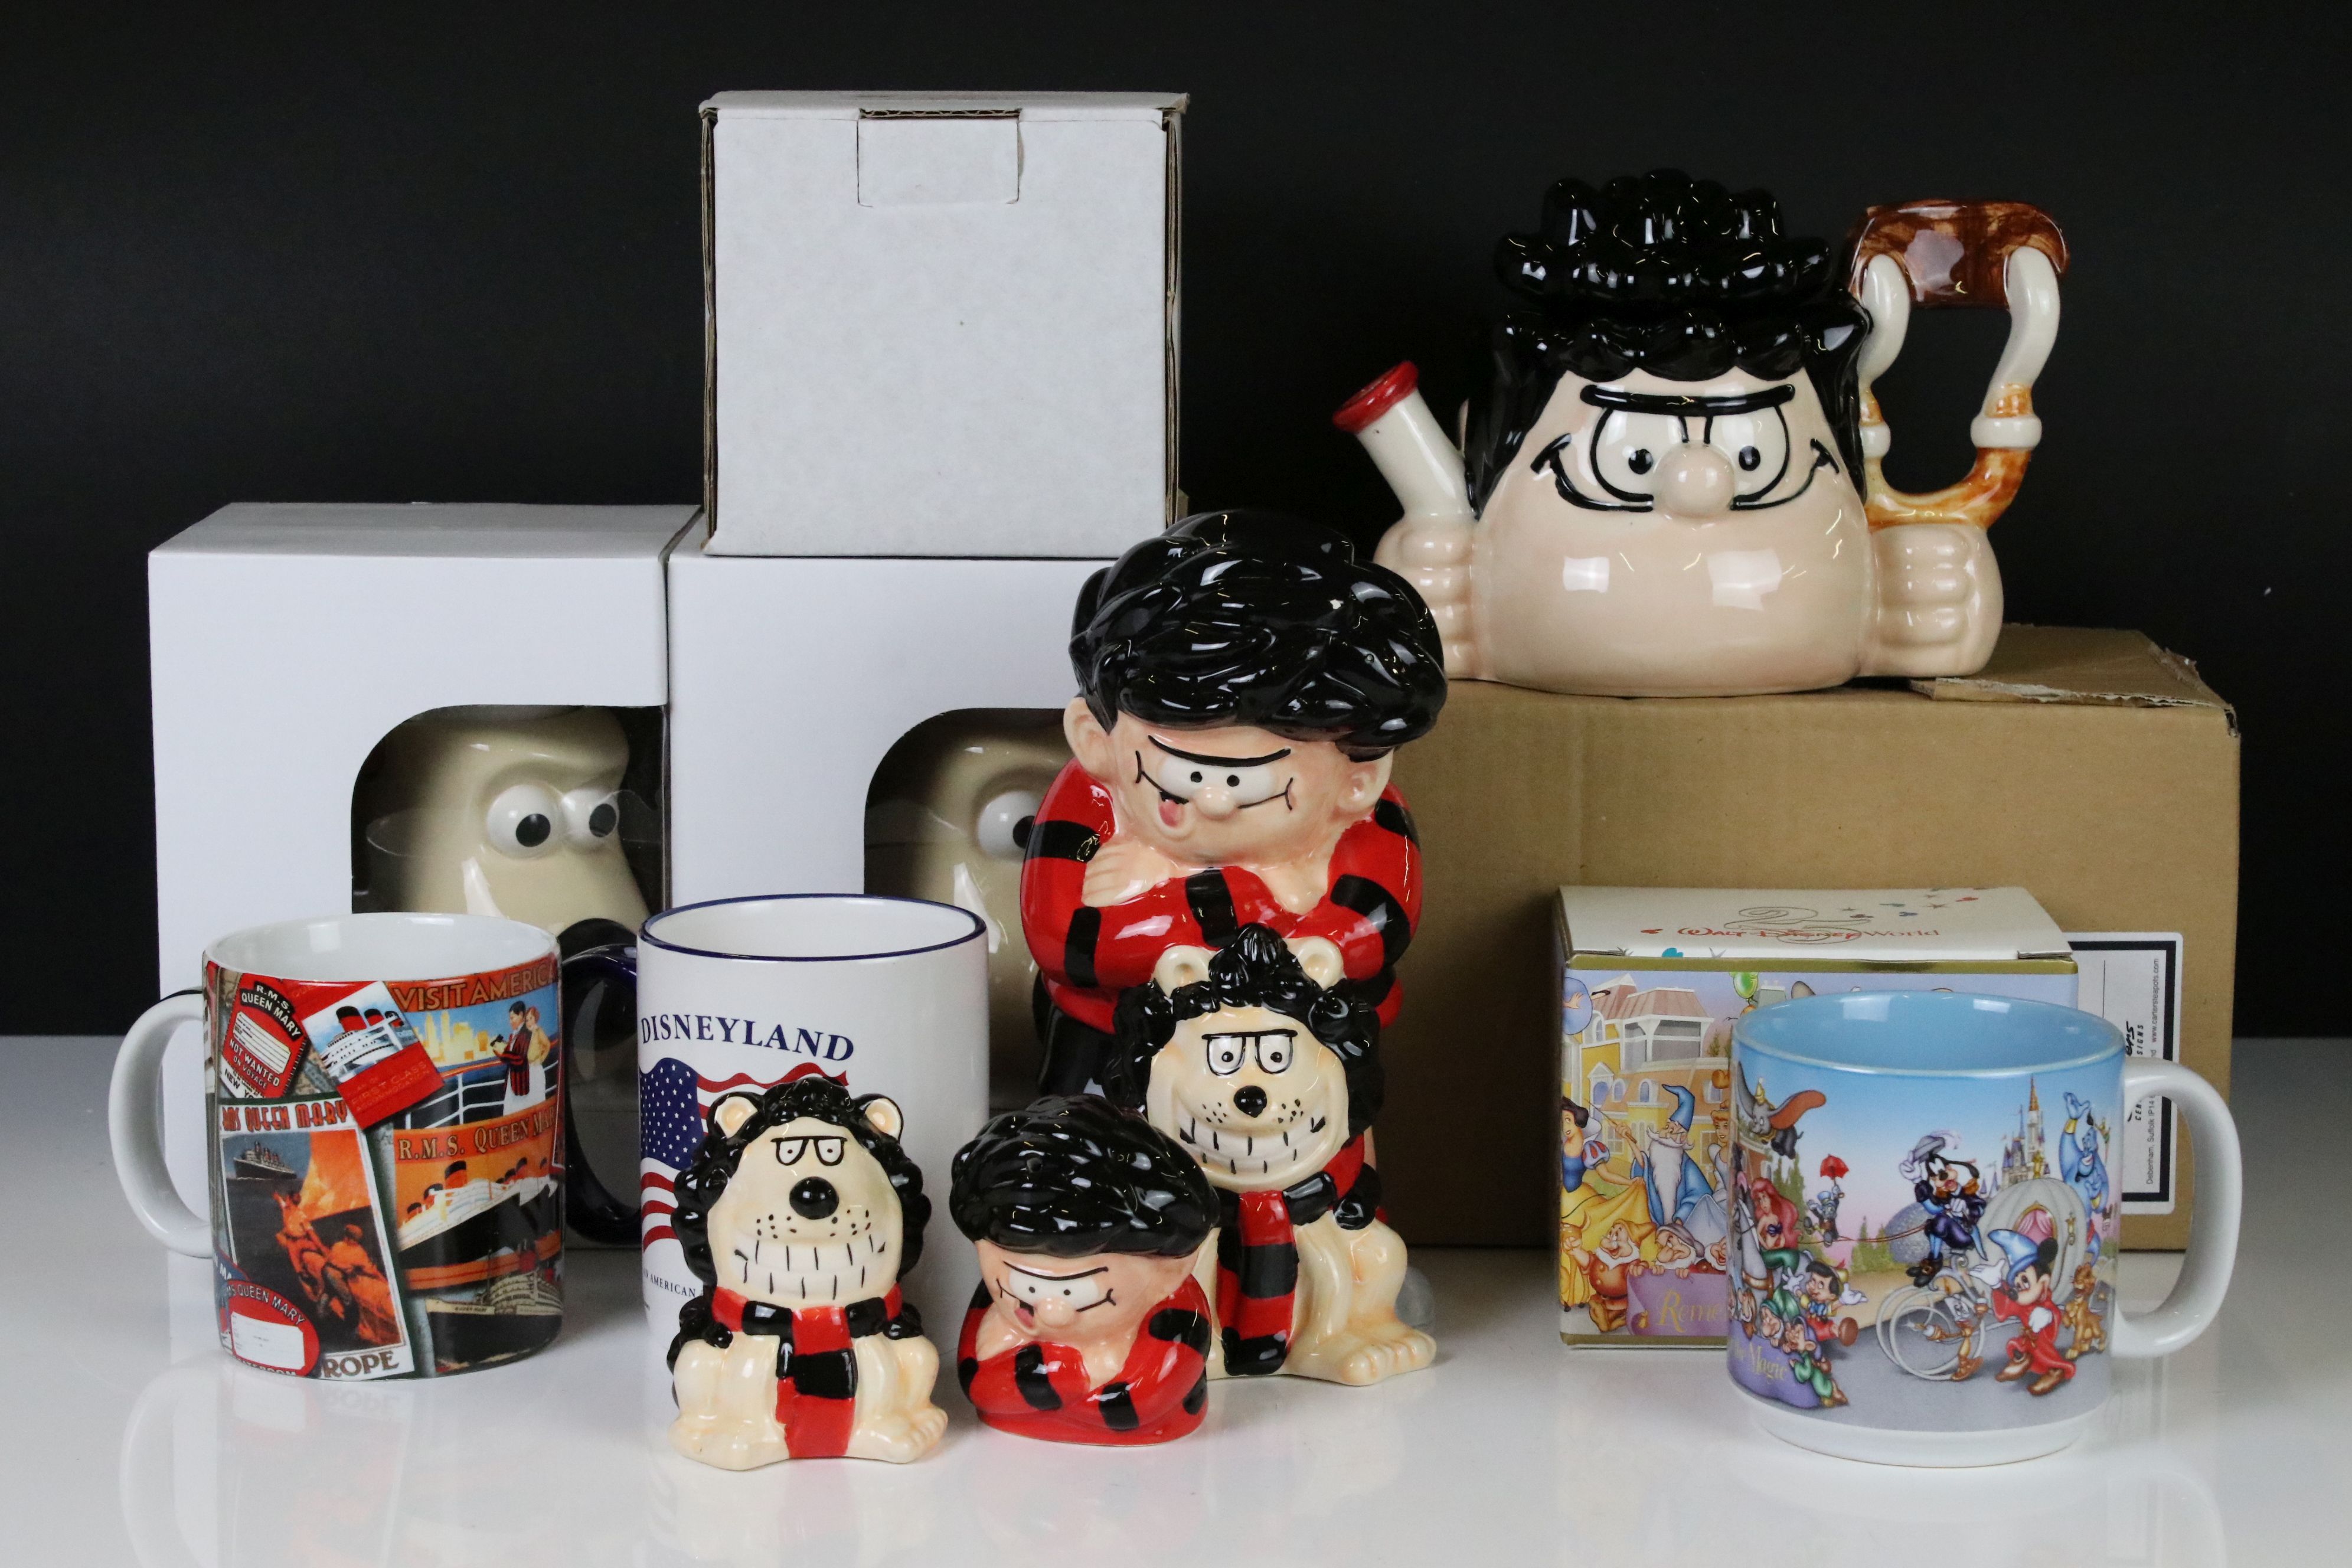 Collection of Dennis the Menace items including BDPP01 Dennis the Menace Teapot, Dennis the Menace